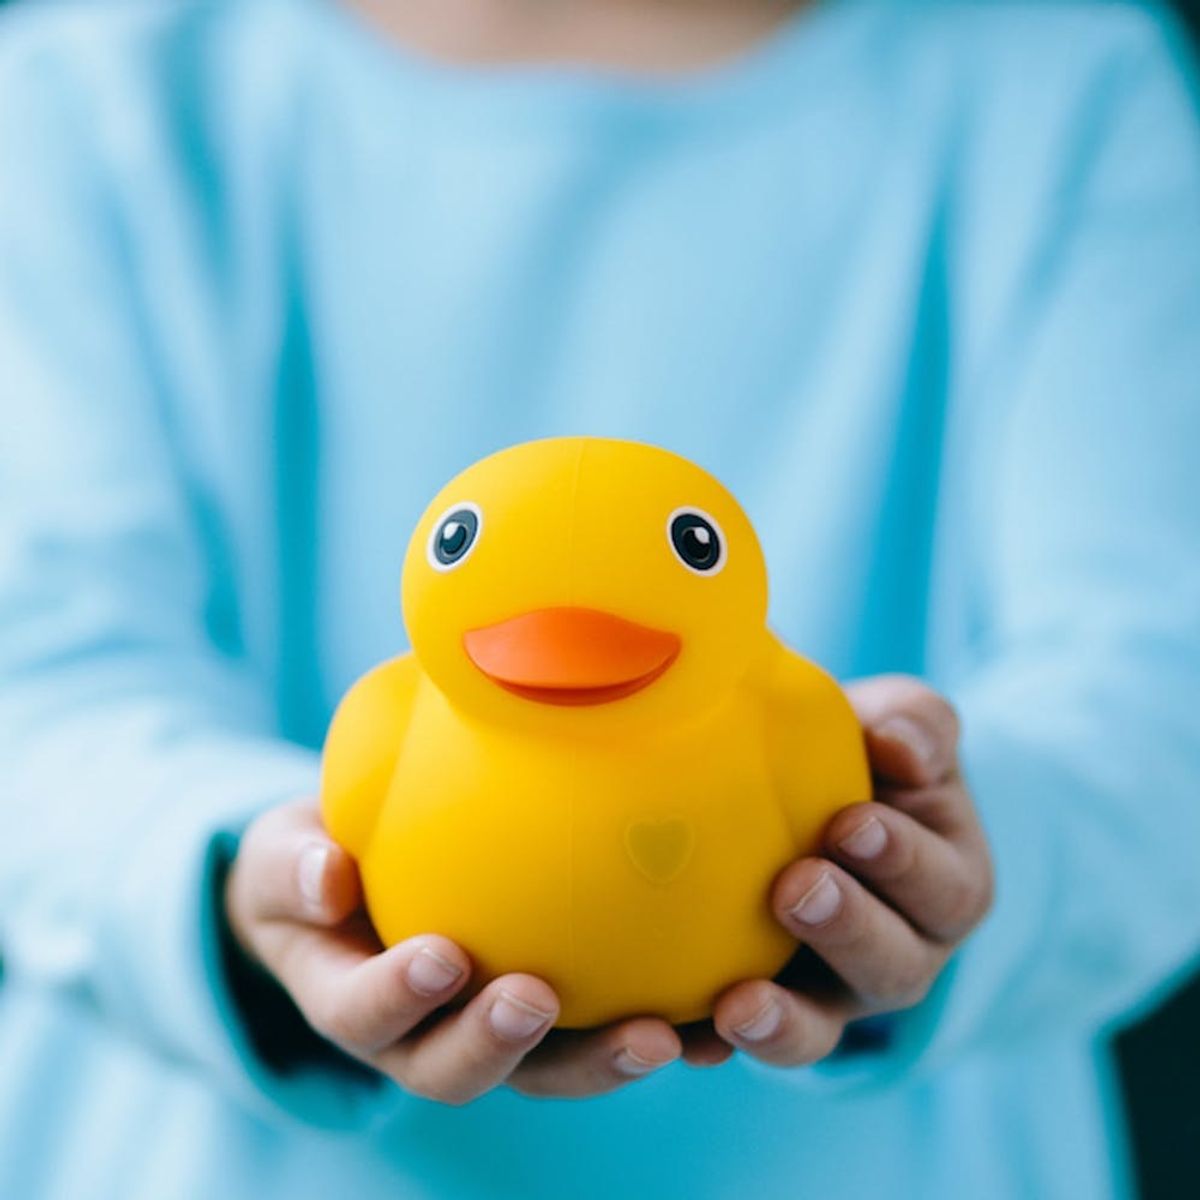 Meet the $100 Rubber Ducky Showing at CES This Year